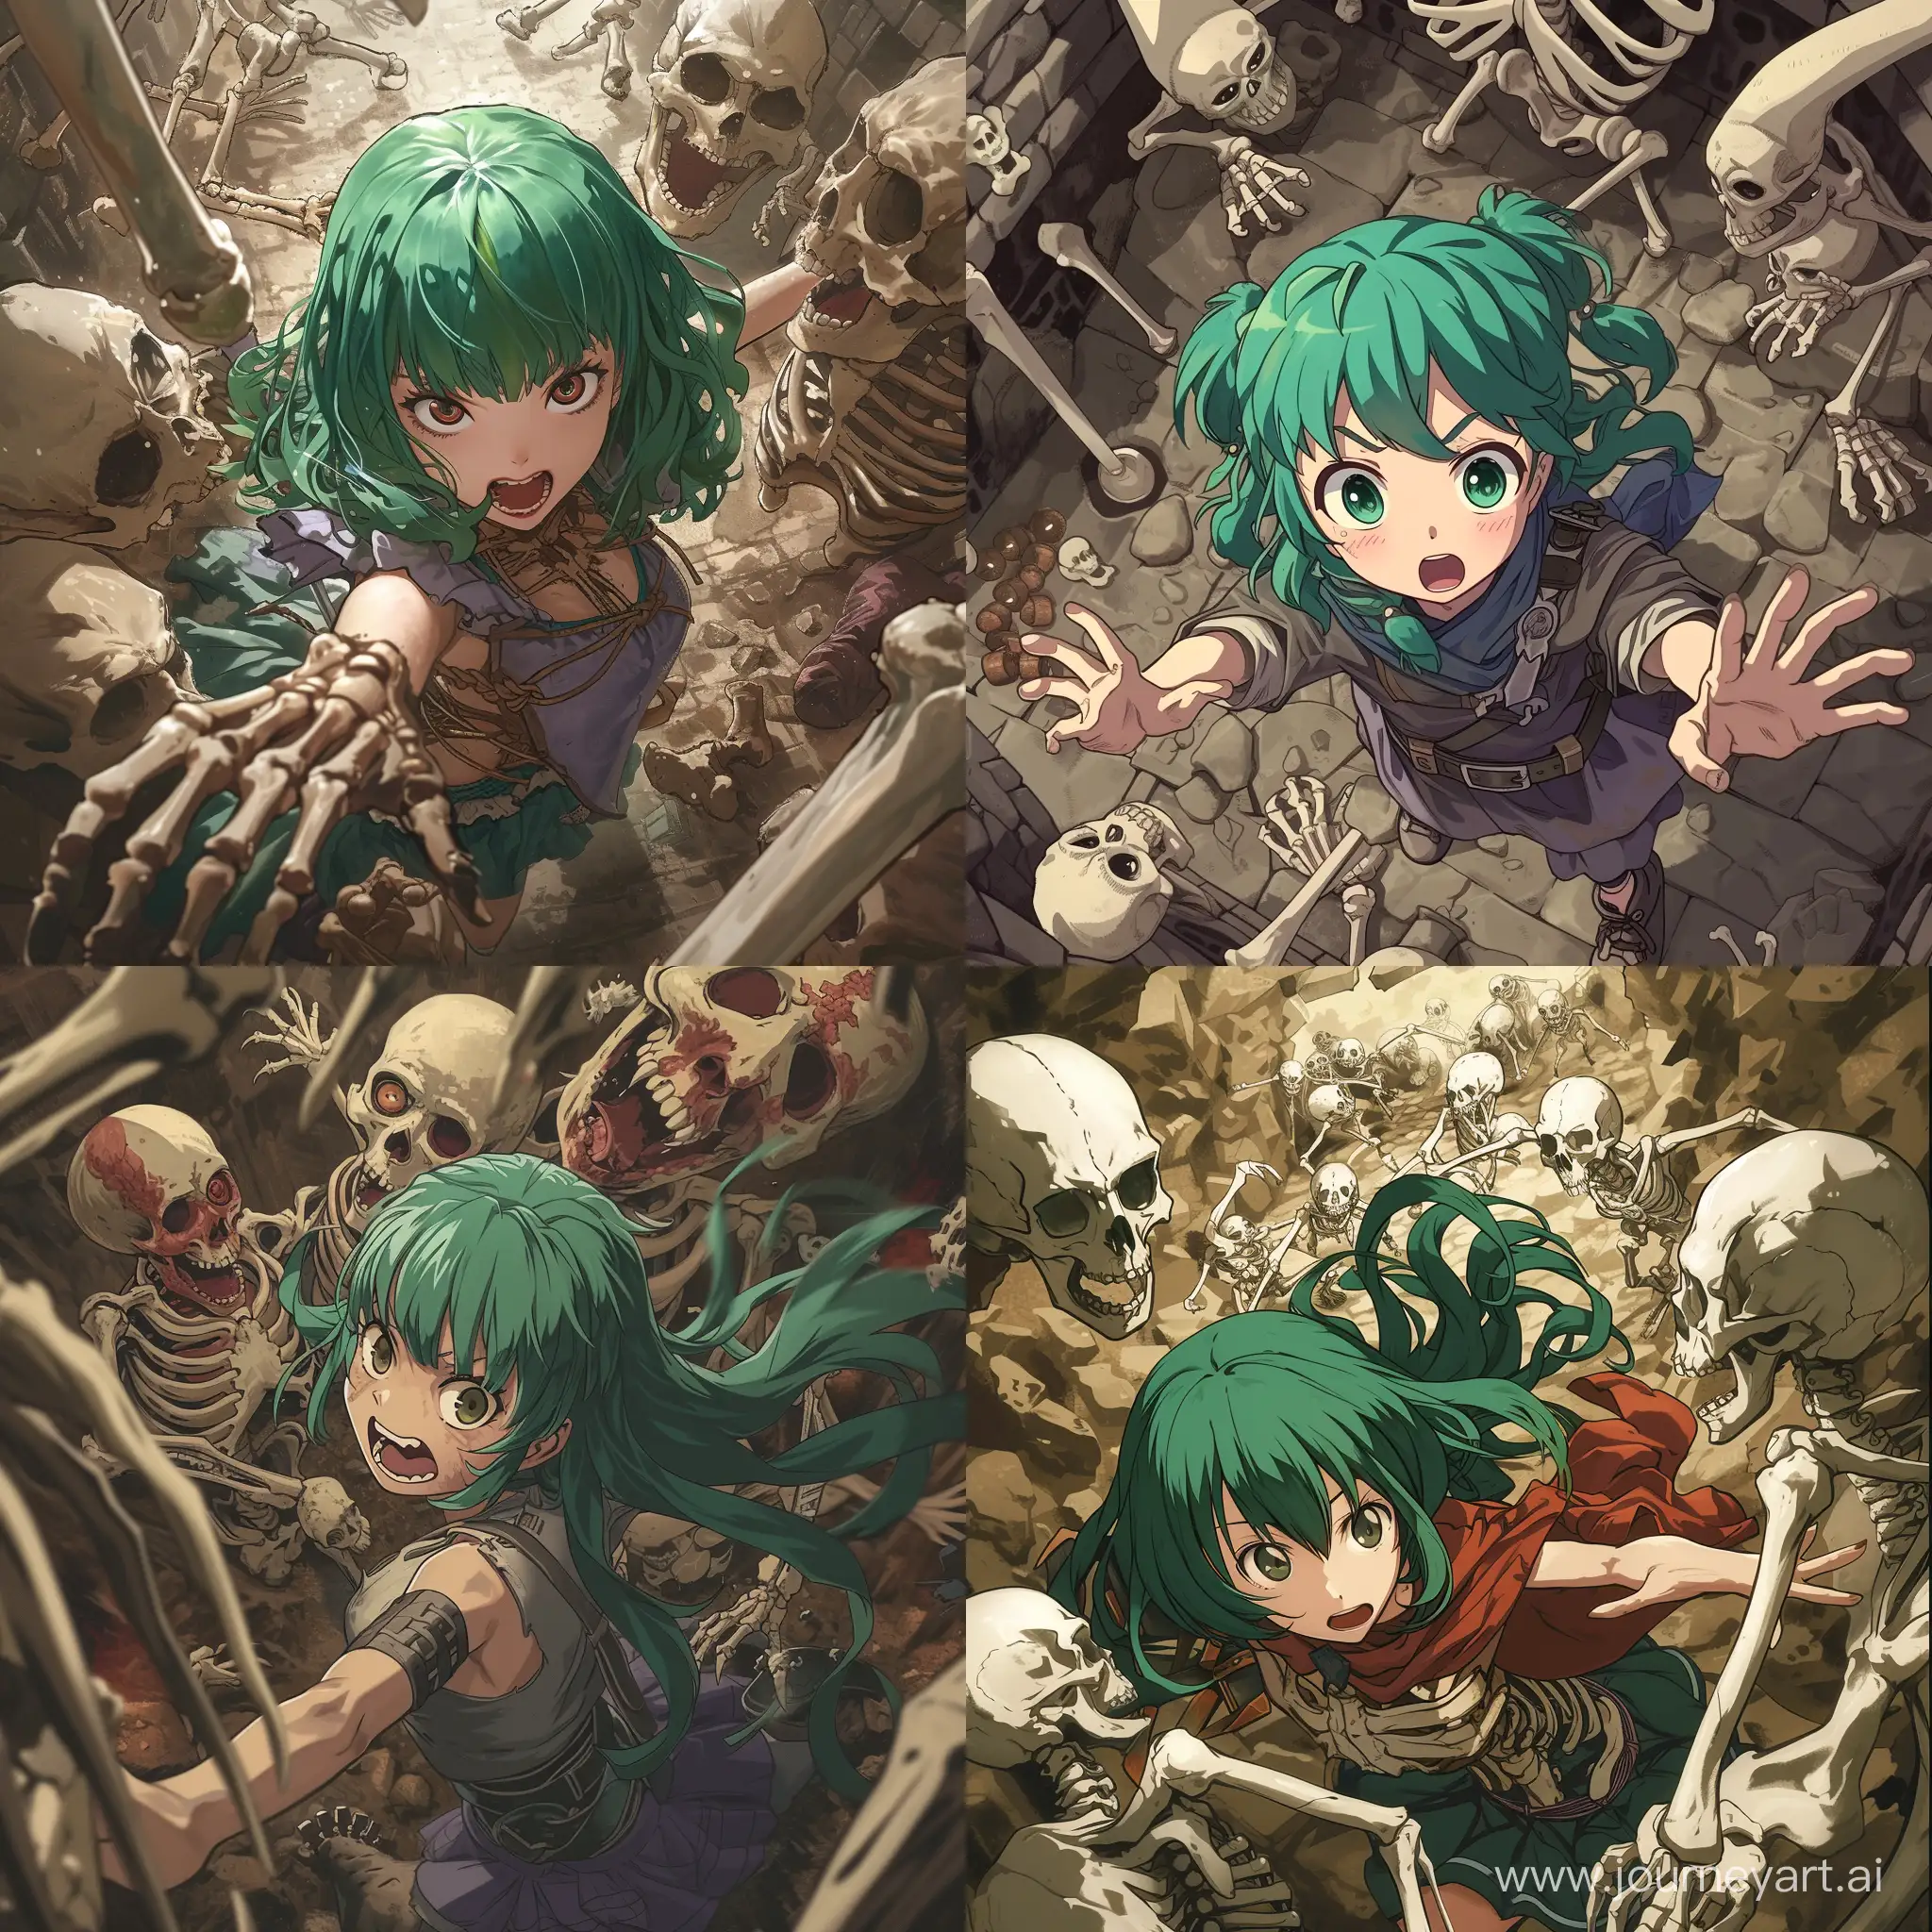 Courageous-GreenHaired-Anime-Adventurer-Confronts-Dungeon-Monsters